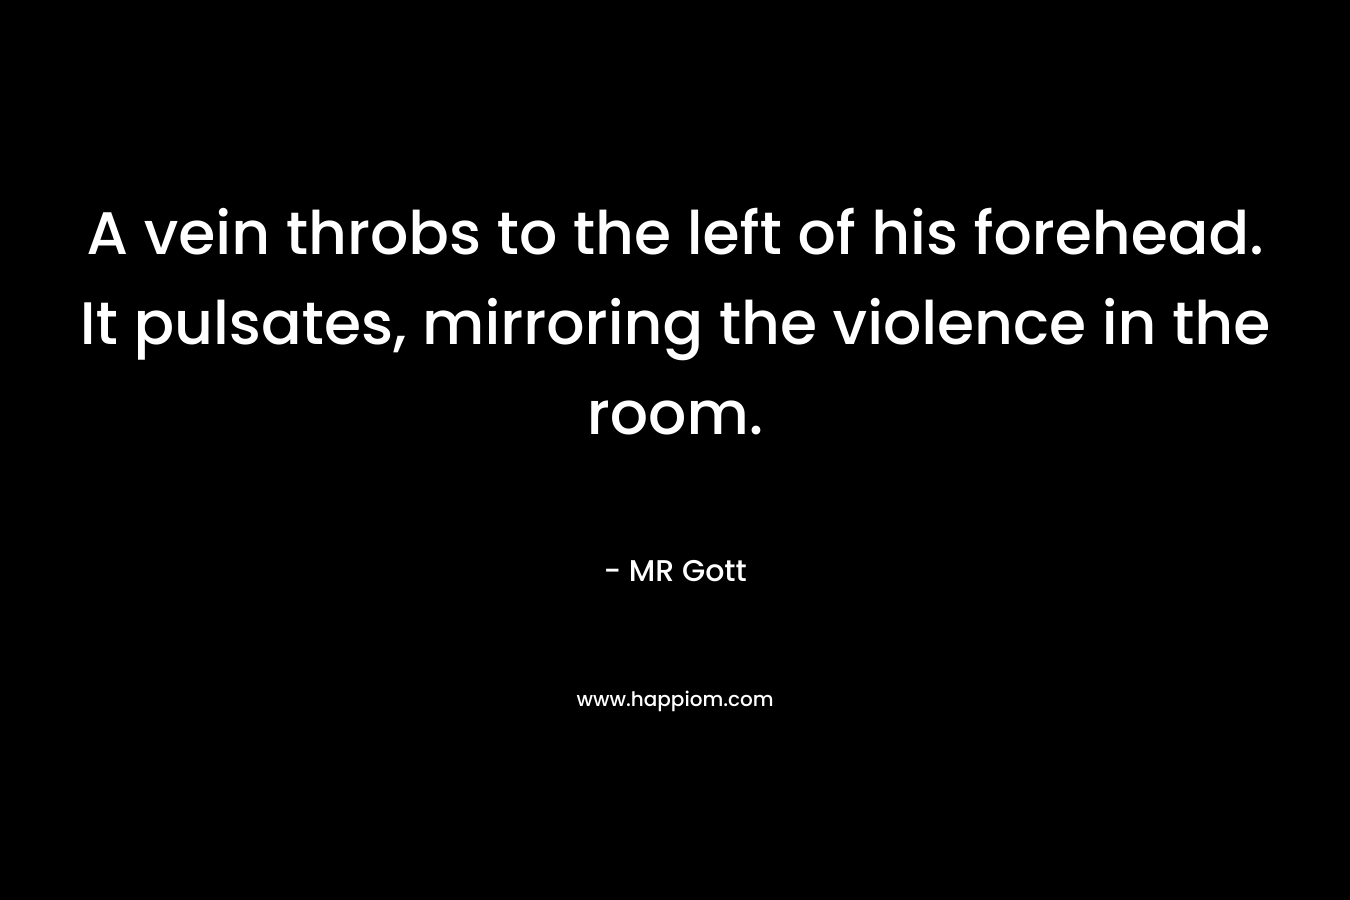 A vein throbs to the left of his forehead. It pulsates, mirroring the violence in the room. – MR Gott